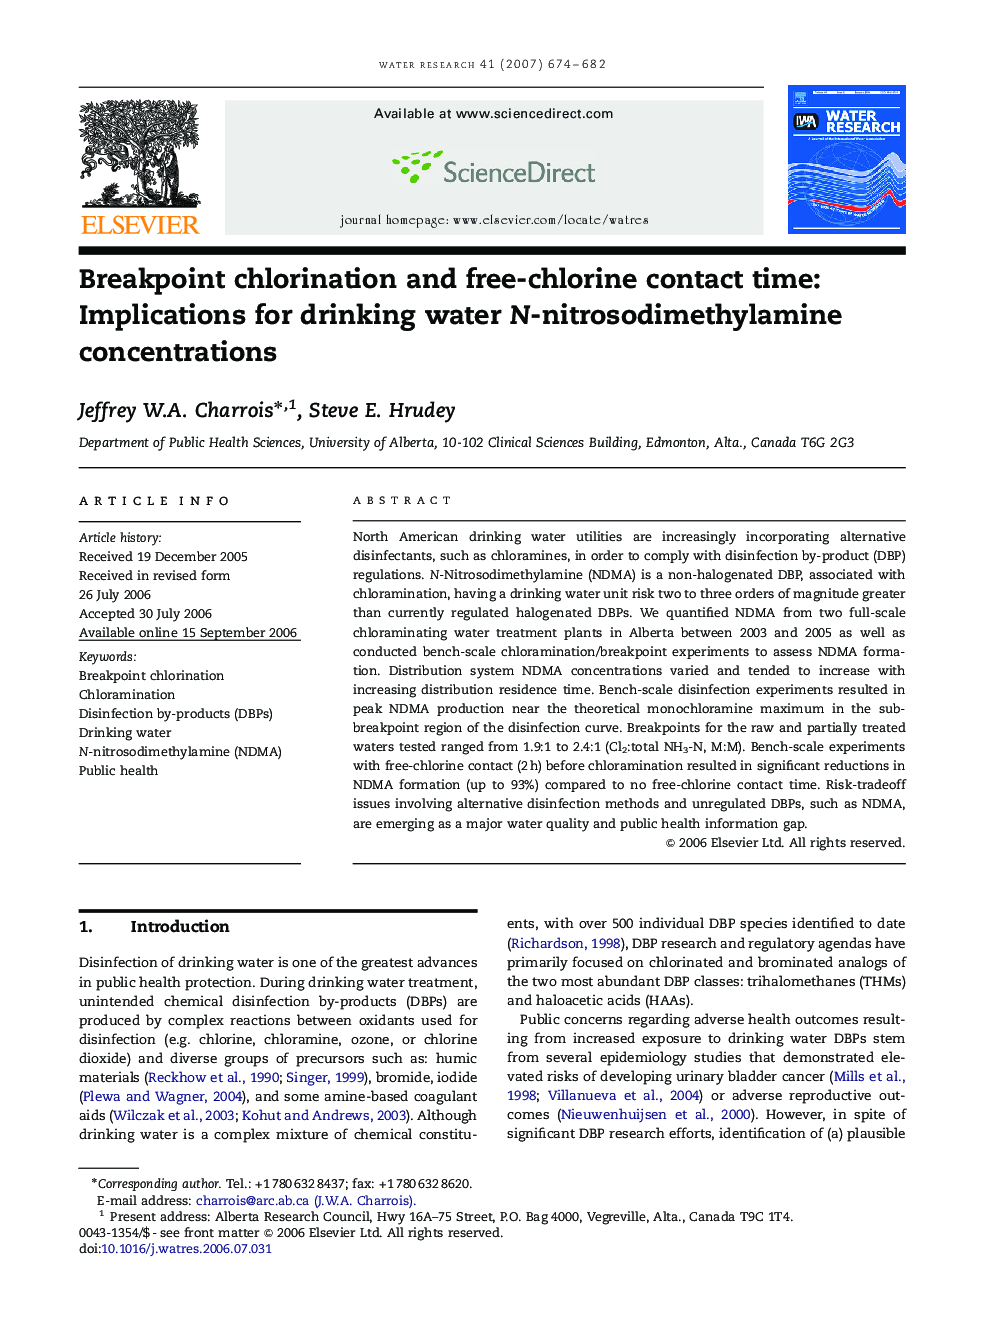 Breakpoint chlorination and free-chlorine contact time: Implications for drinking water N-nitrosodimethylamine concentrations